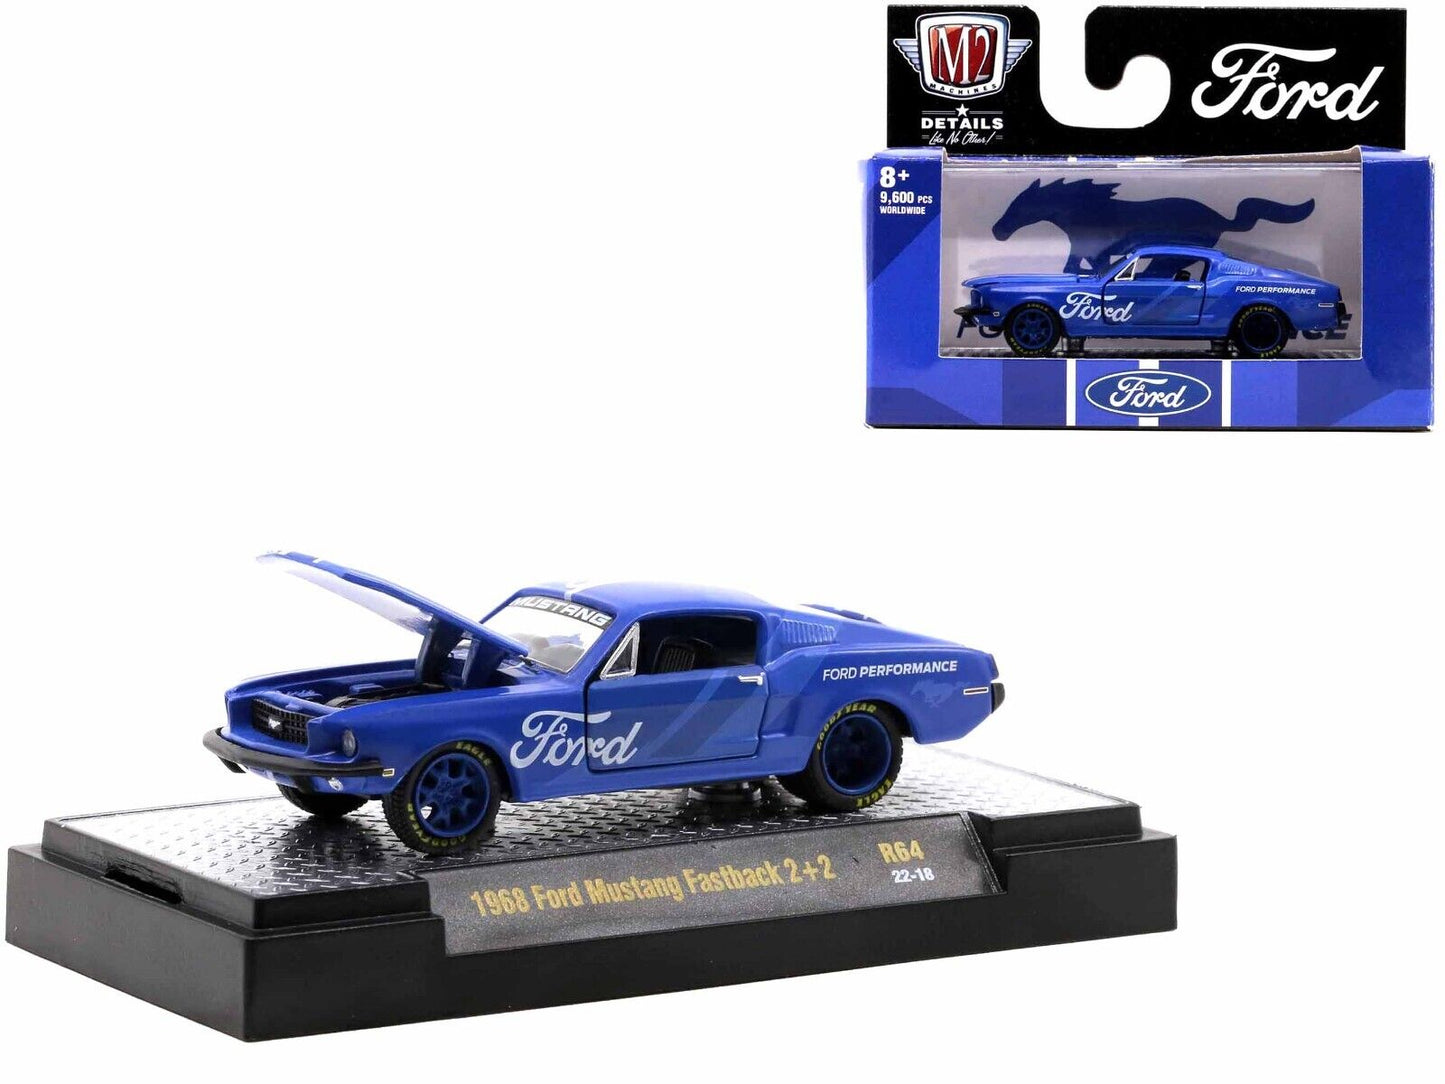 M2 Machines Auto Meets Release 64 1968 Ford Mustang Fastback 2+2 Blue 1:64